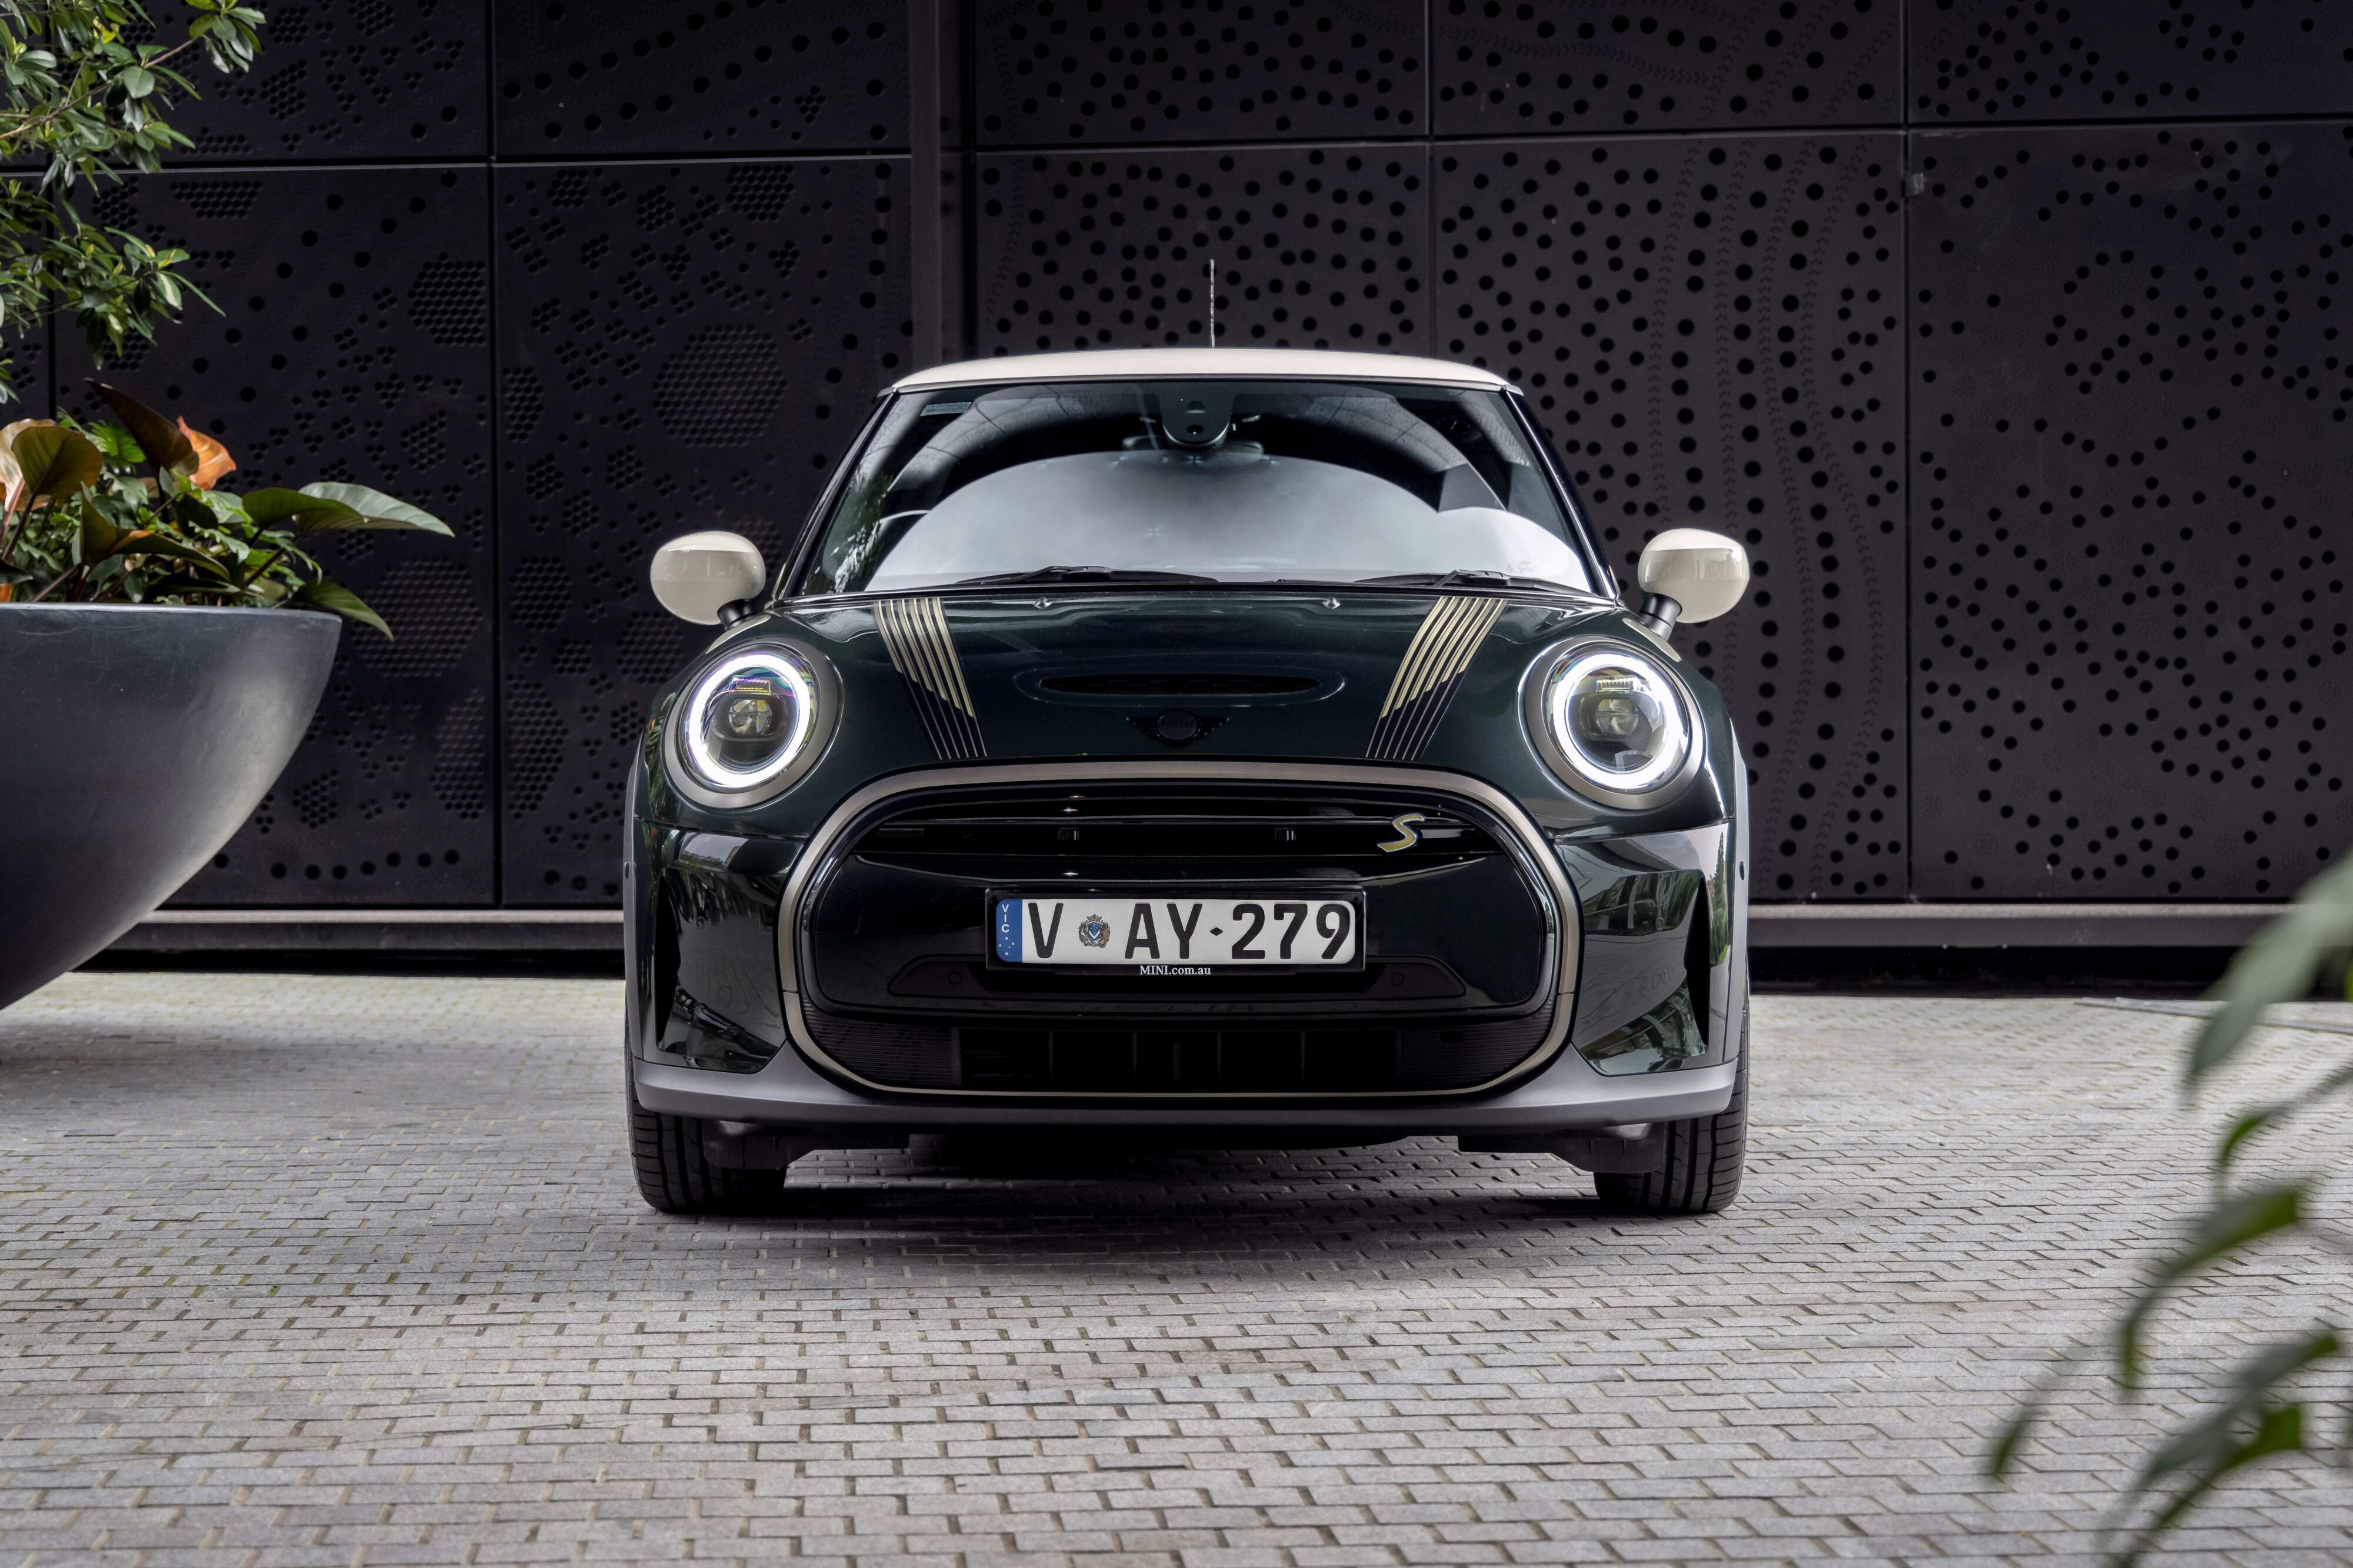 A front view of the new Mini Cooper S EV